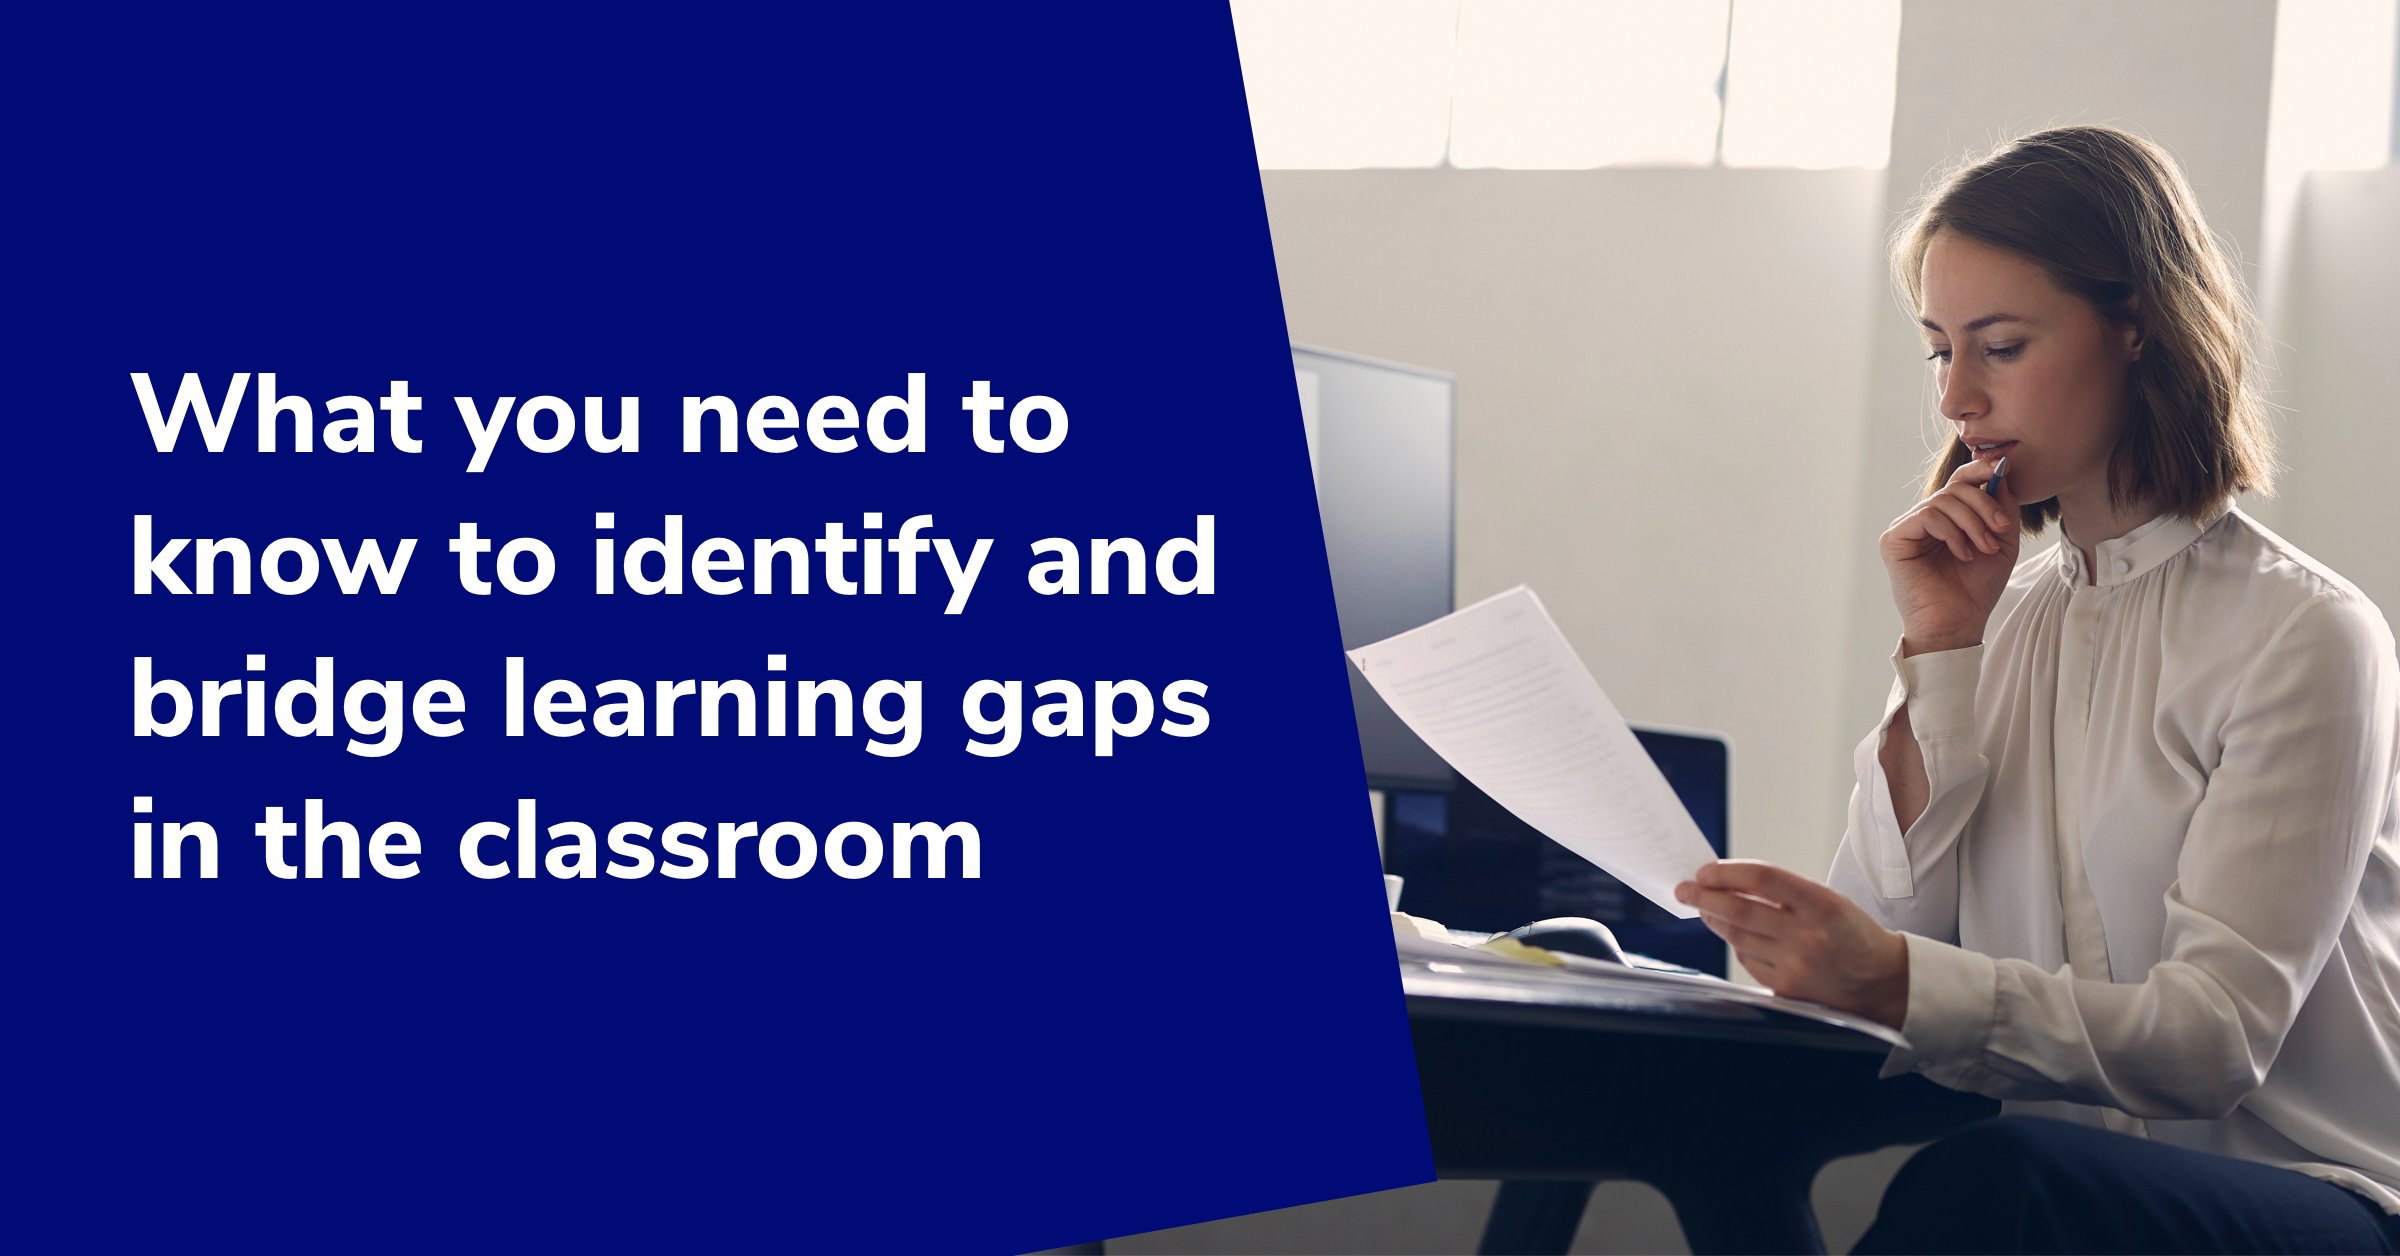 What you need to know to identify and bridge learning gaps in the classroom